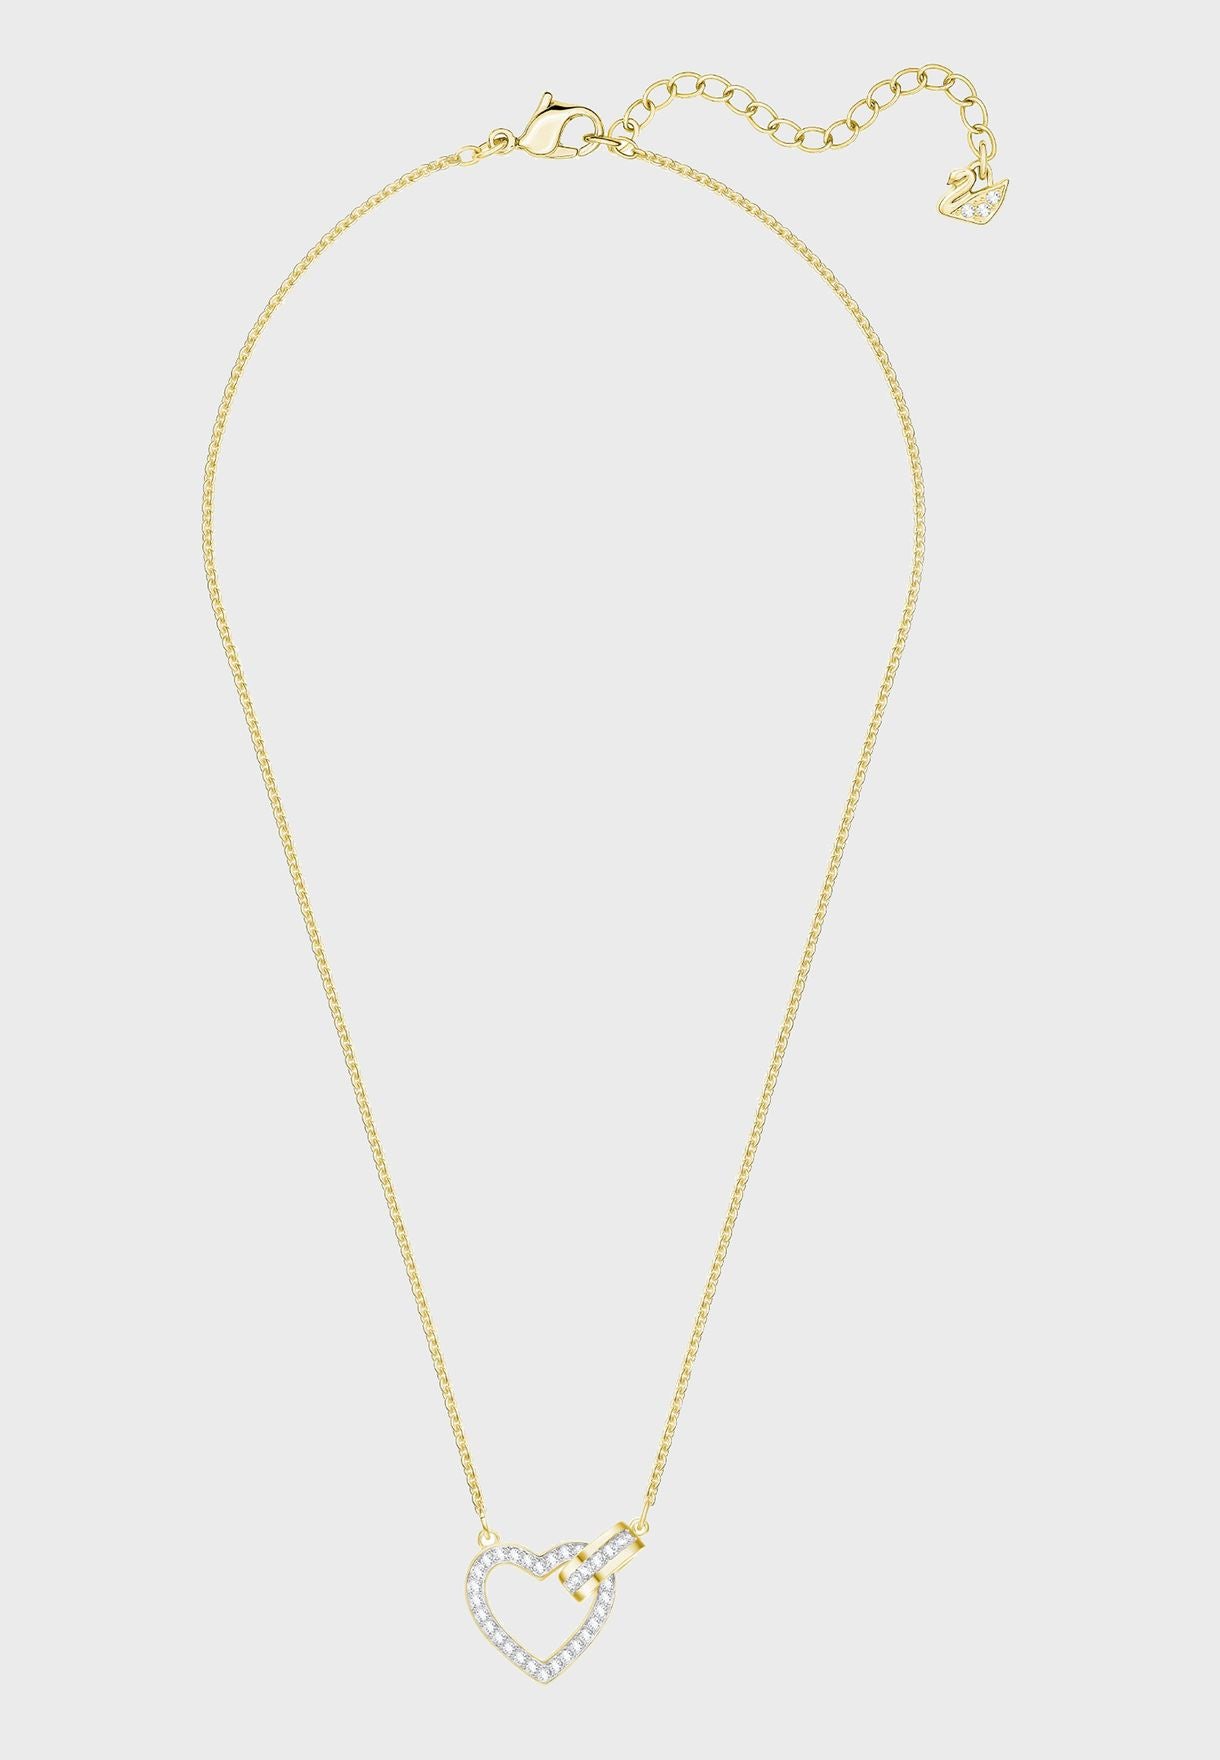 SWAROVSKI Lovely jewelry yellow gold plated necklace #5405576